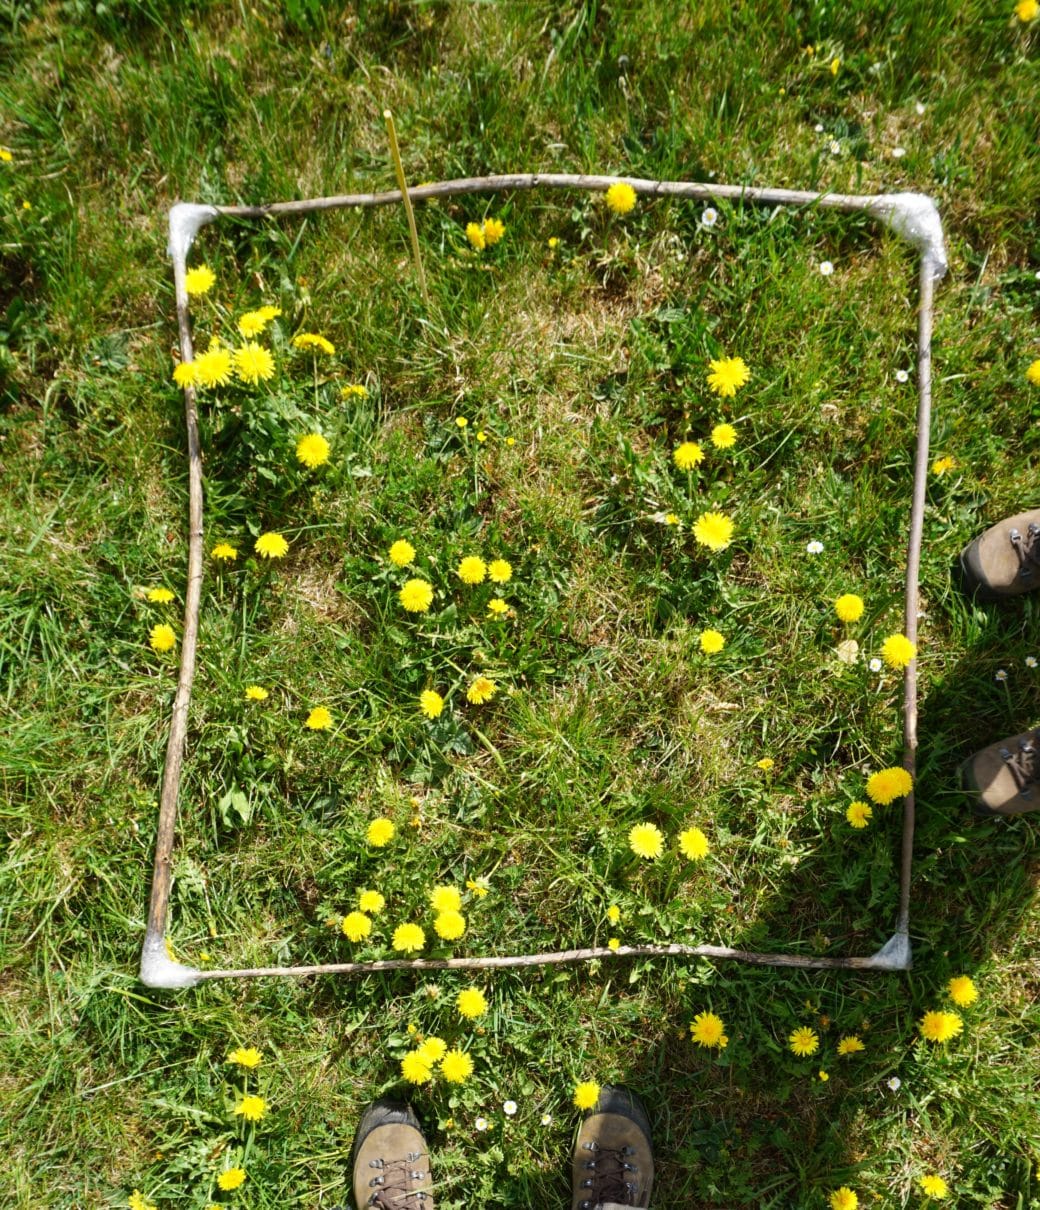 Picture: The photo shows a meadow with grass and flowering dandelions, taken from above. On the ground, a frame of four thin branches of equal length and fairly straight growth is placed to delimit the experimental area. The photo serves as a quadrant image to assess the floral cover of the experimental area.